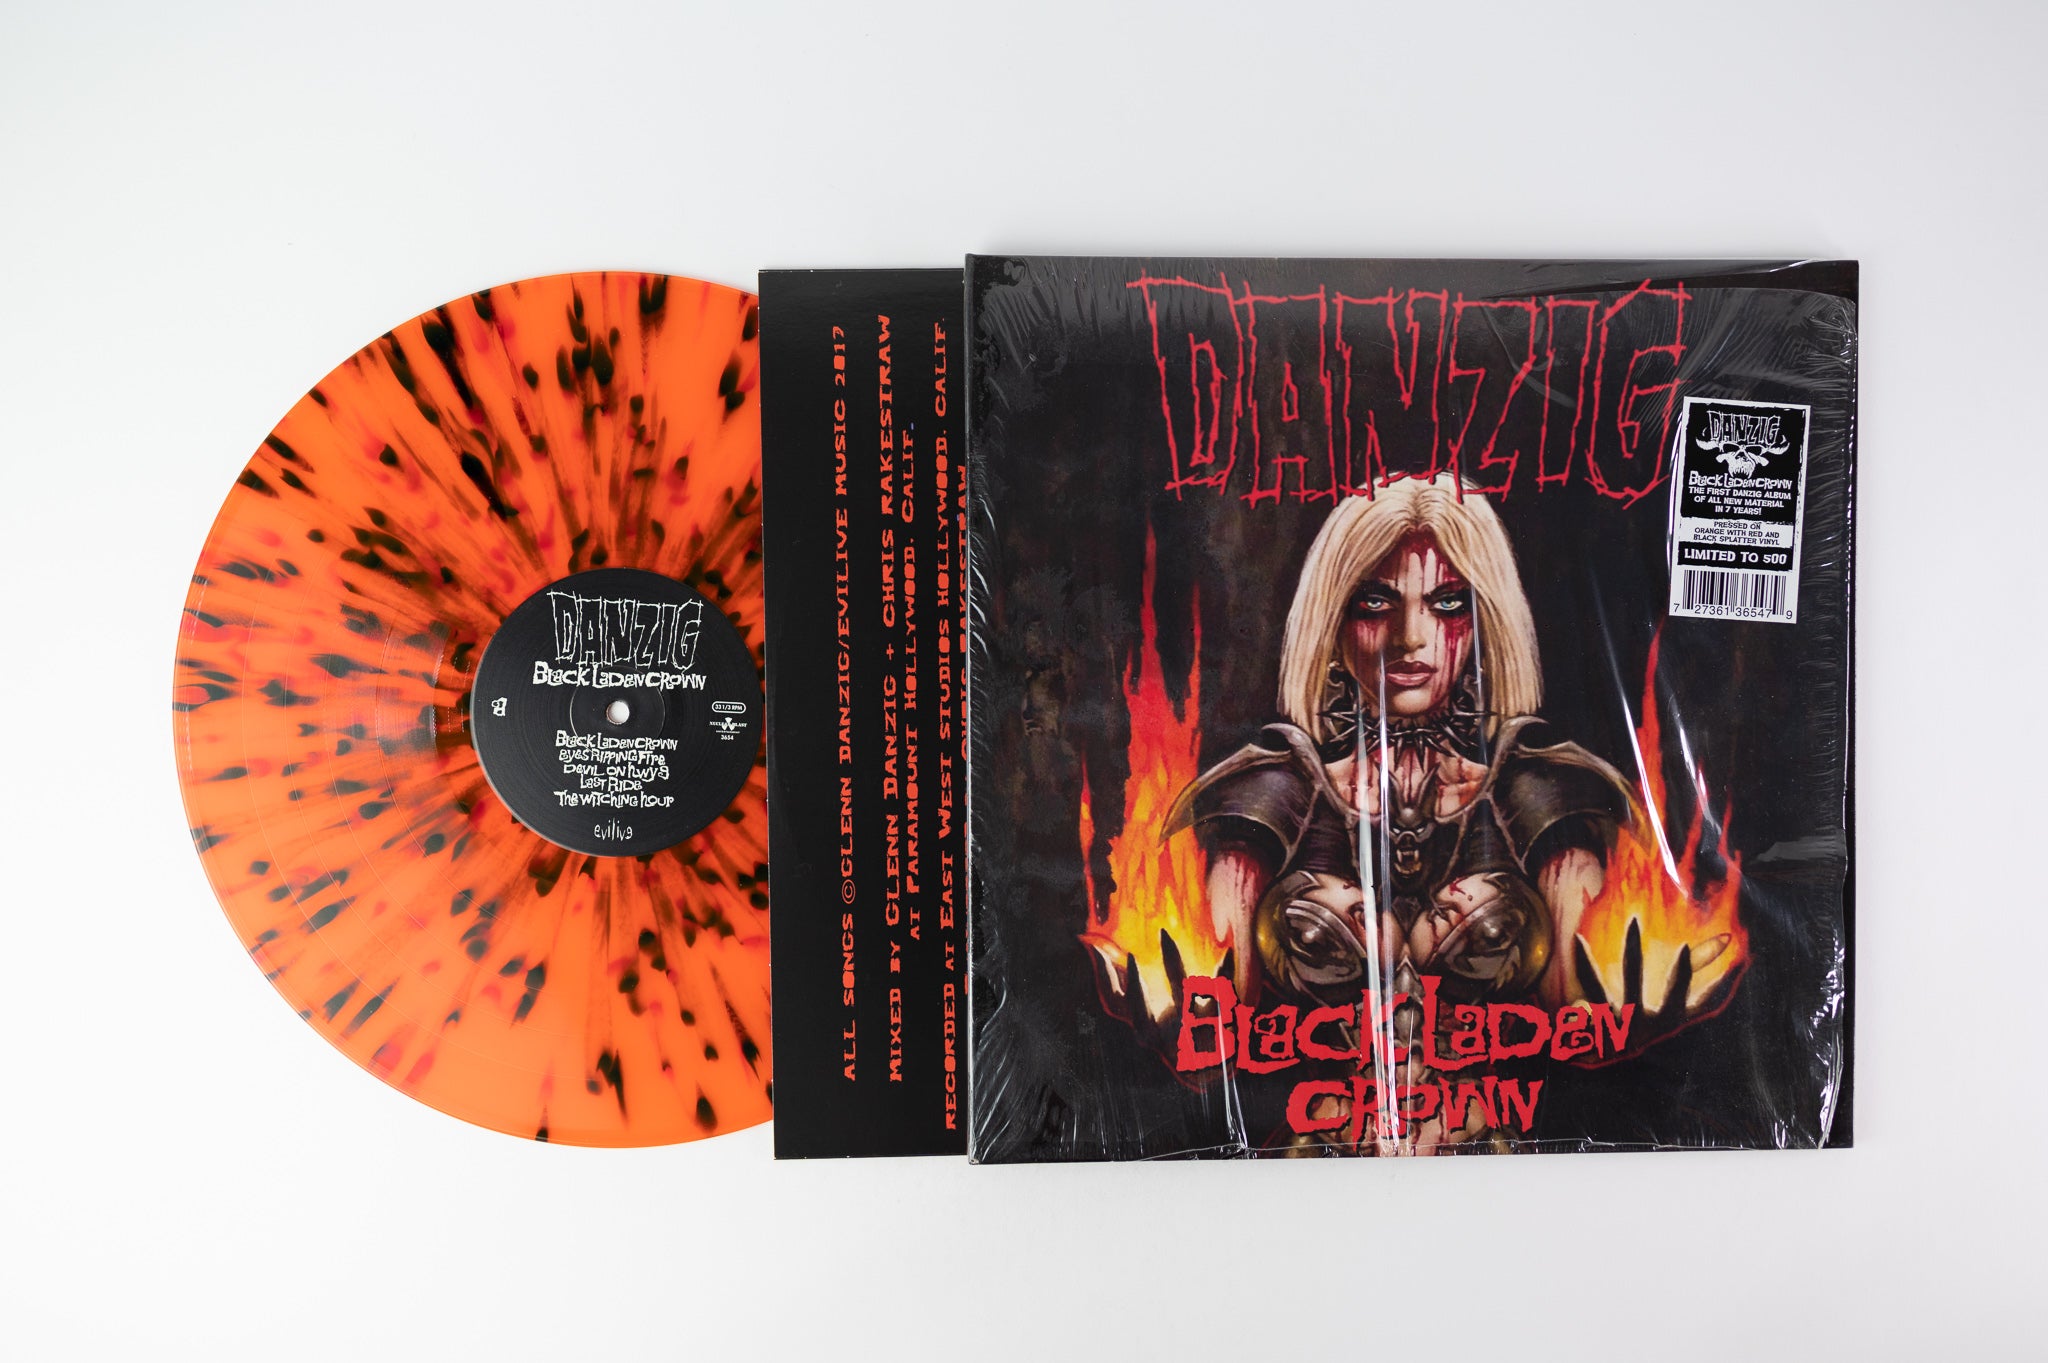 Danzig - Black Laden Crown on Nuclear Blast Limited Orange With Red and Black Splatter